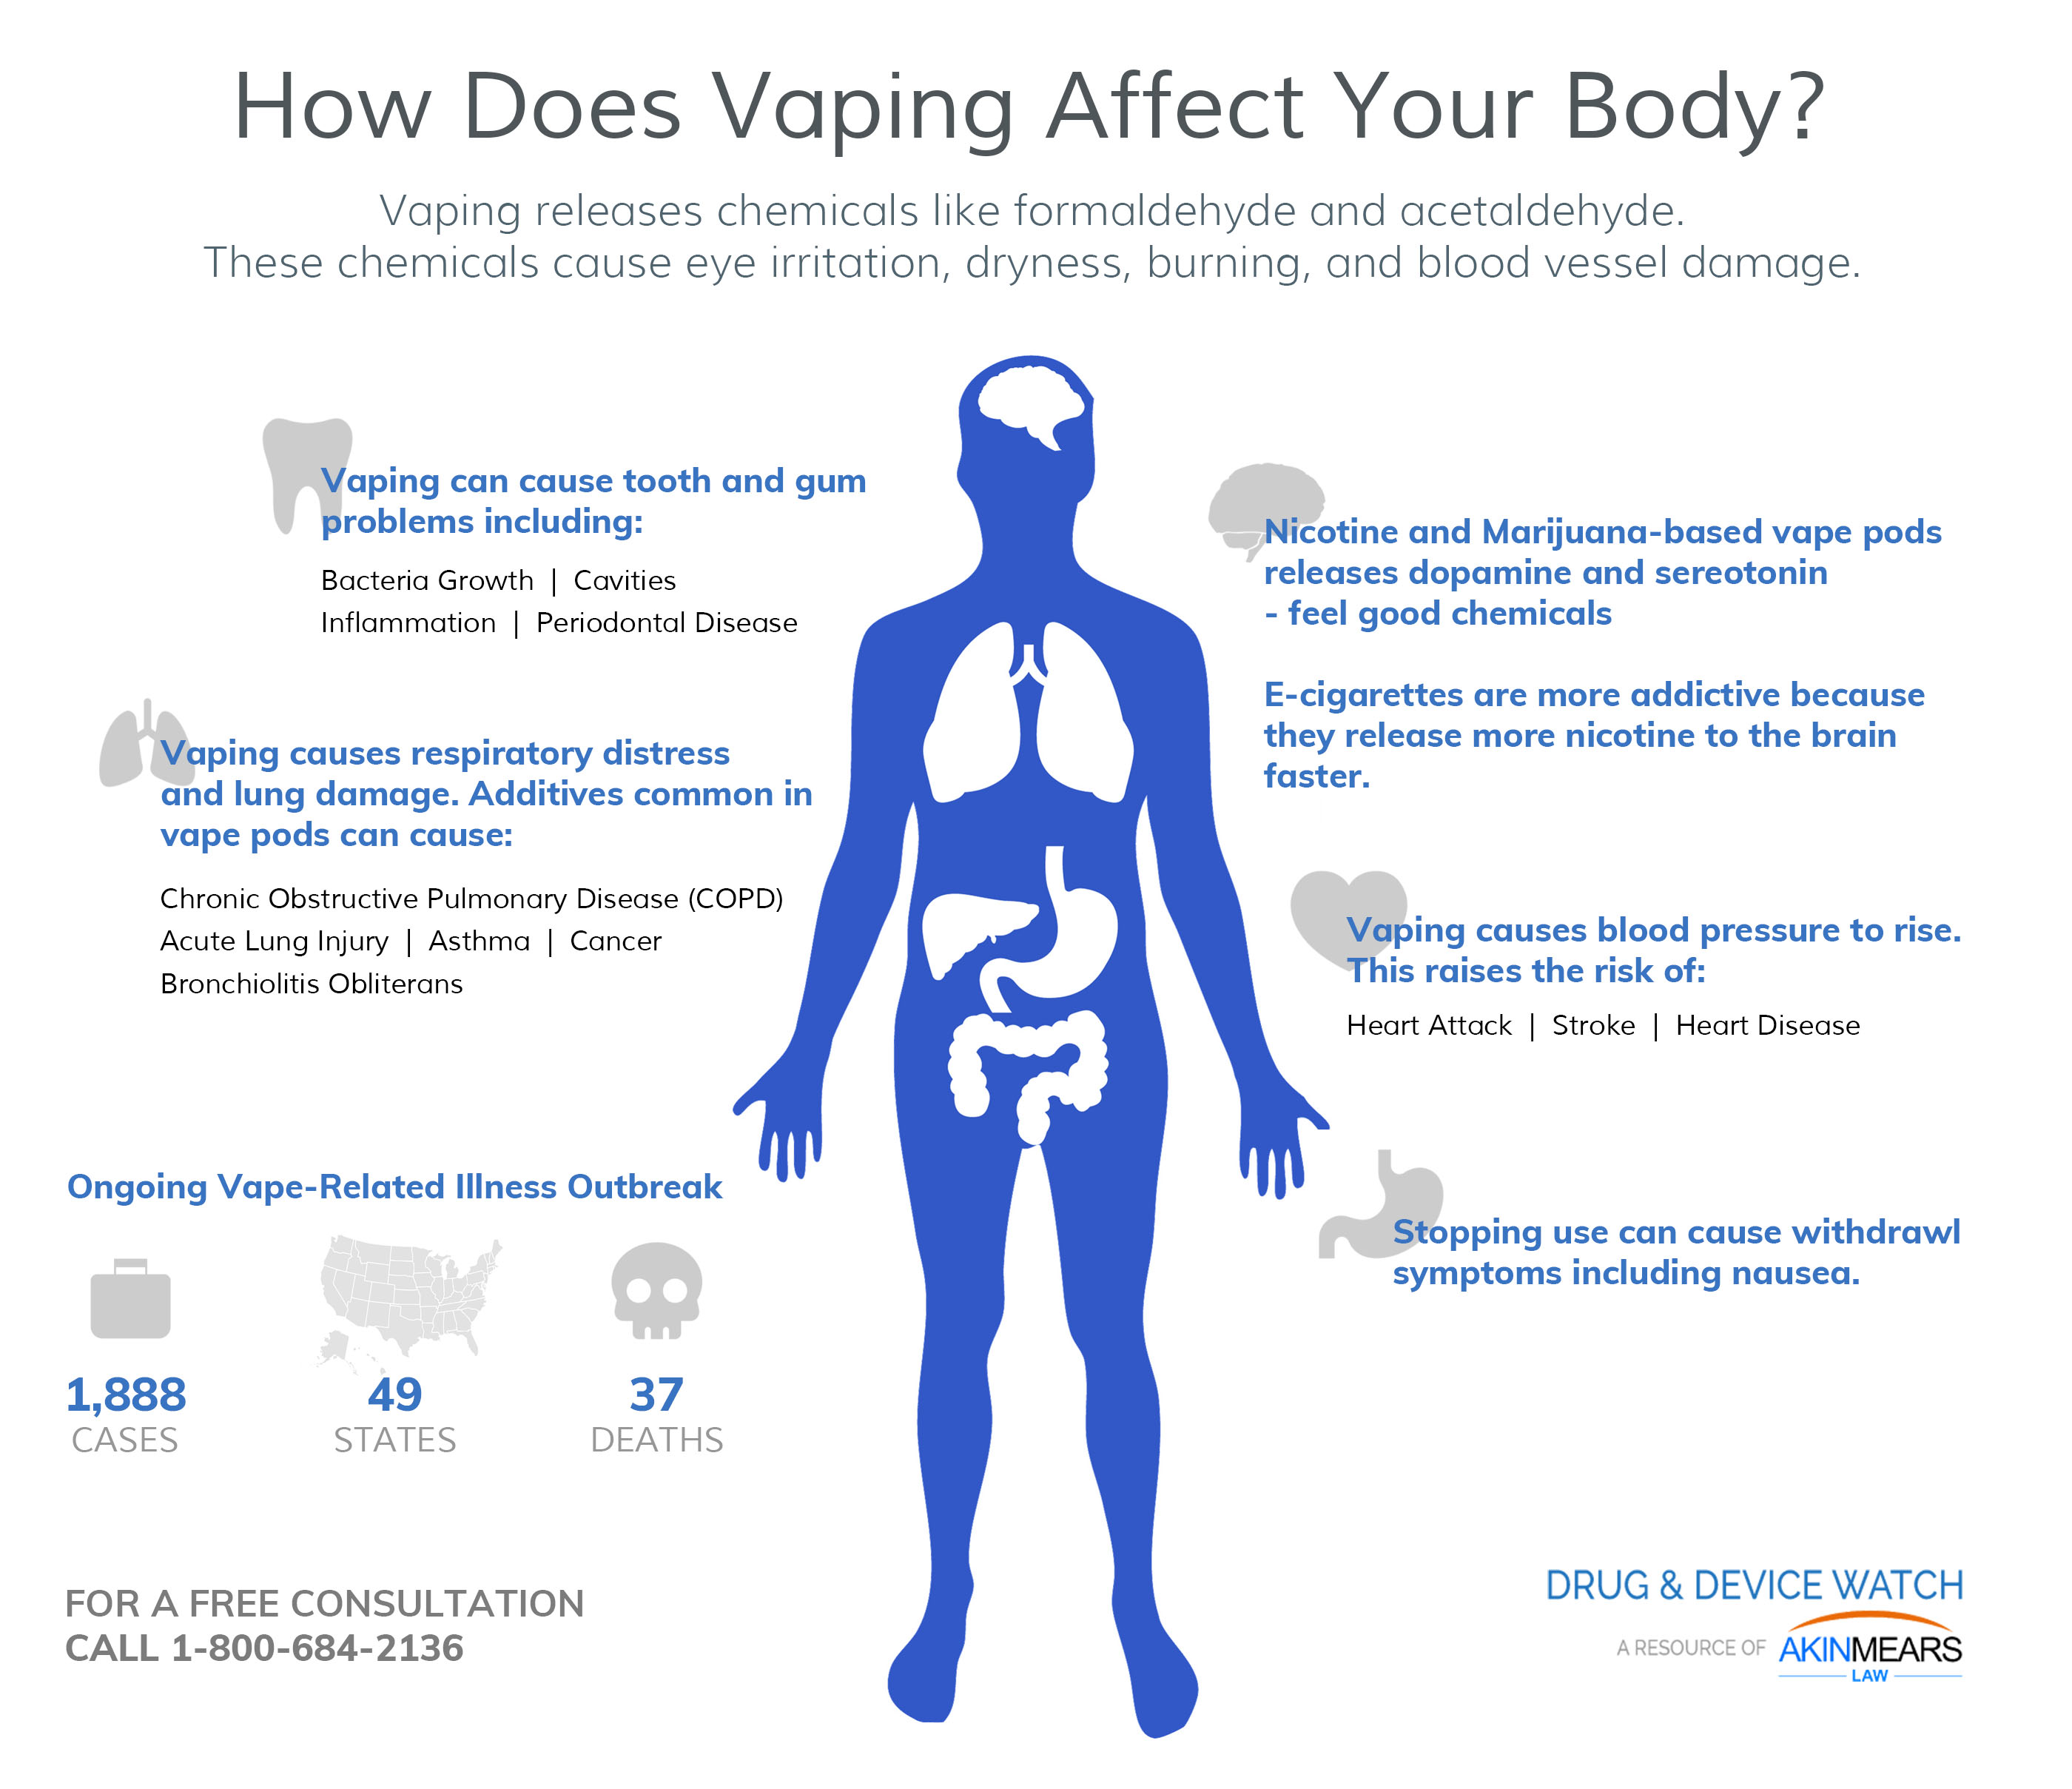 What is the safest vape to use?